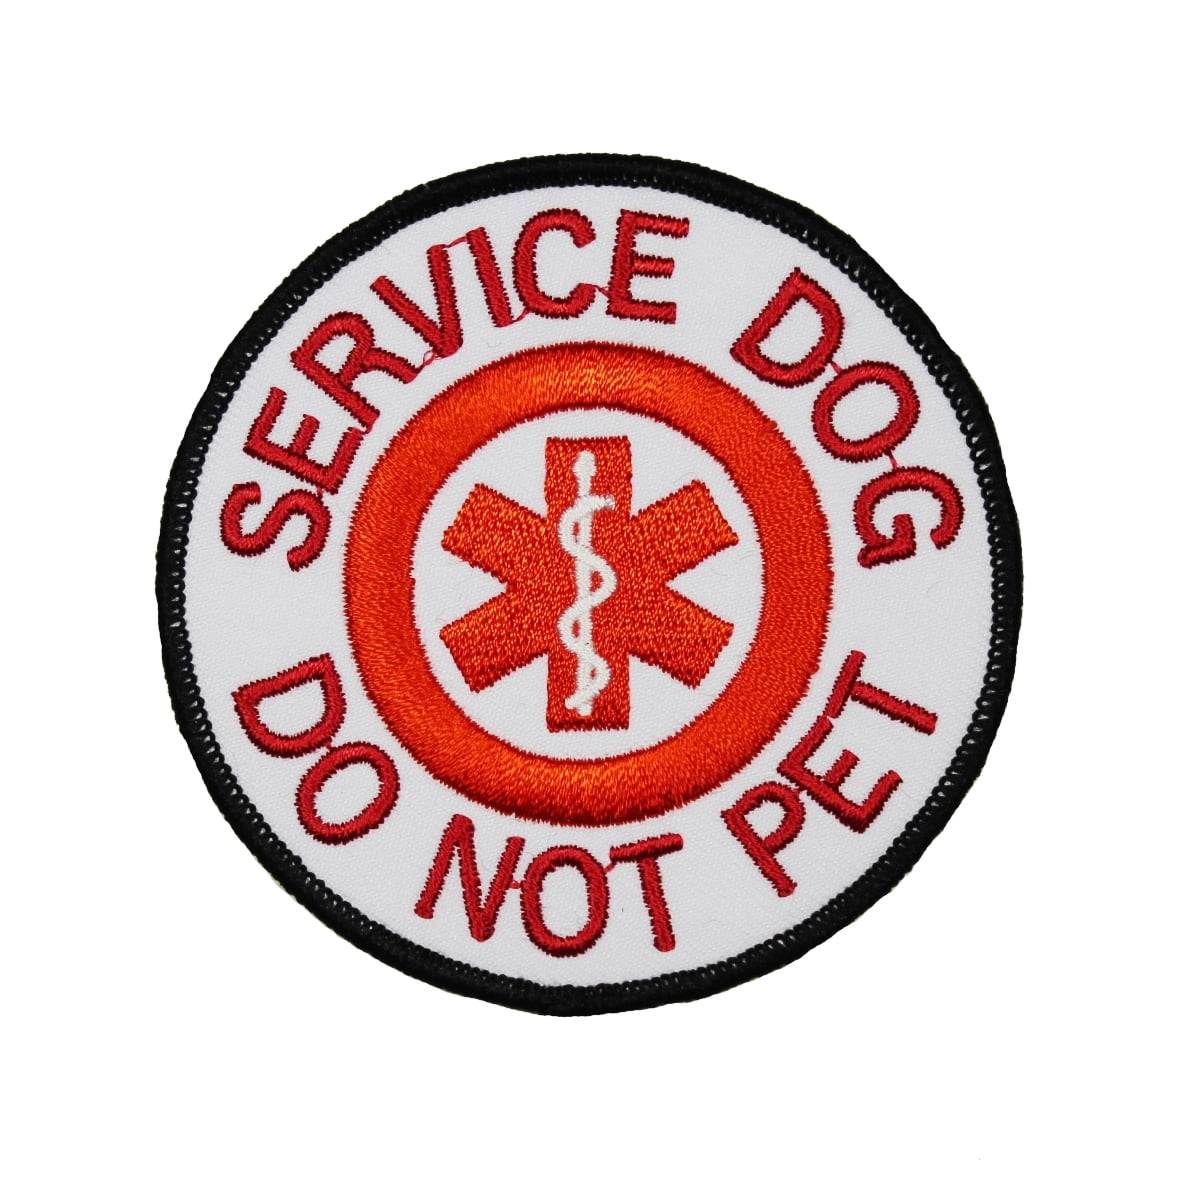 working dog do not pet patch